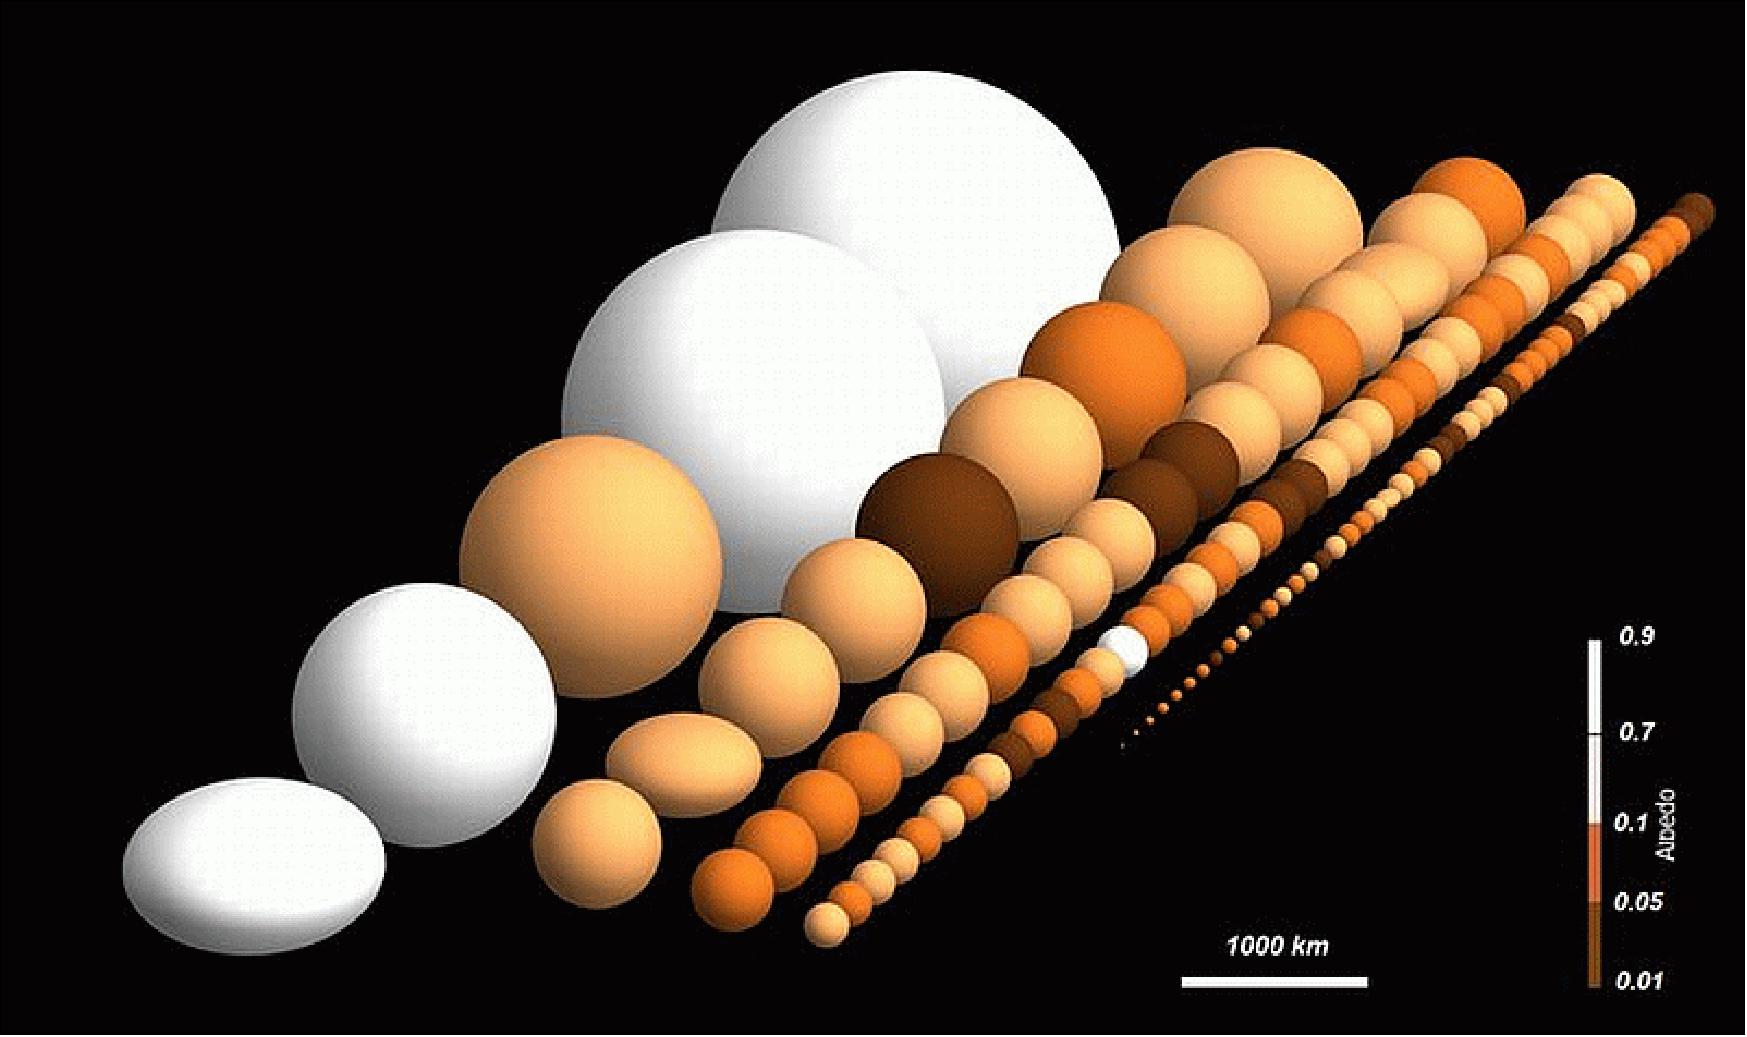 Figure 59: Illustration of TNO sizes and albedos observed by Herschel (image credit: ESA, Herschel, PACS, SPIRE, and the Herschel 'TNOs are Cool' Team)